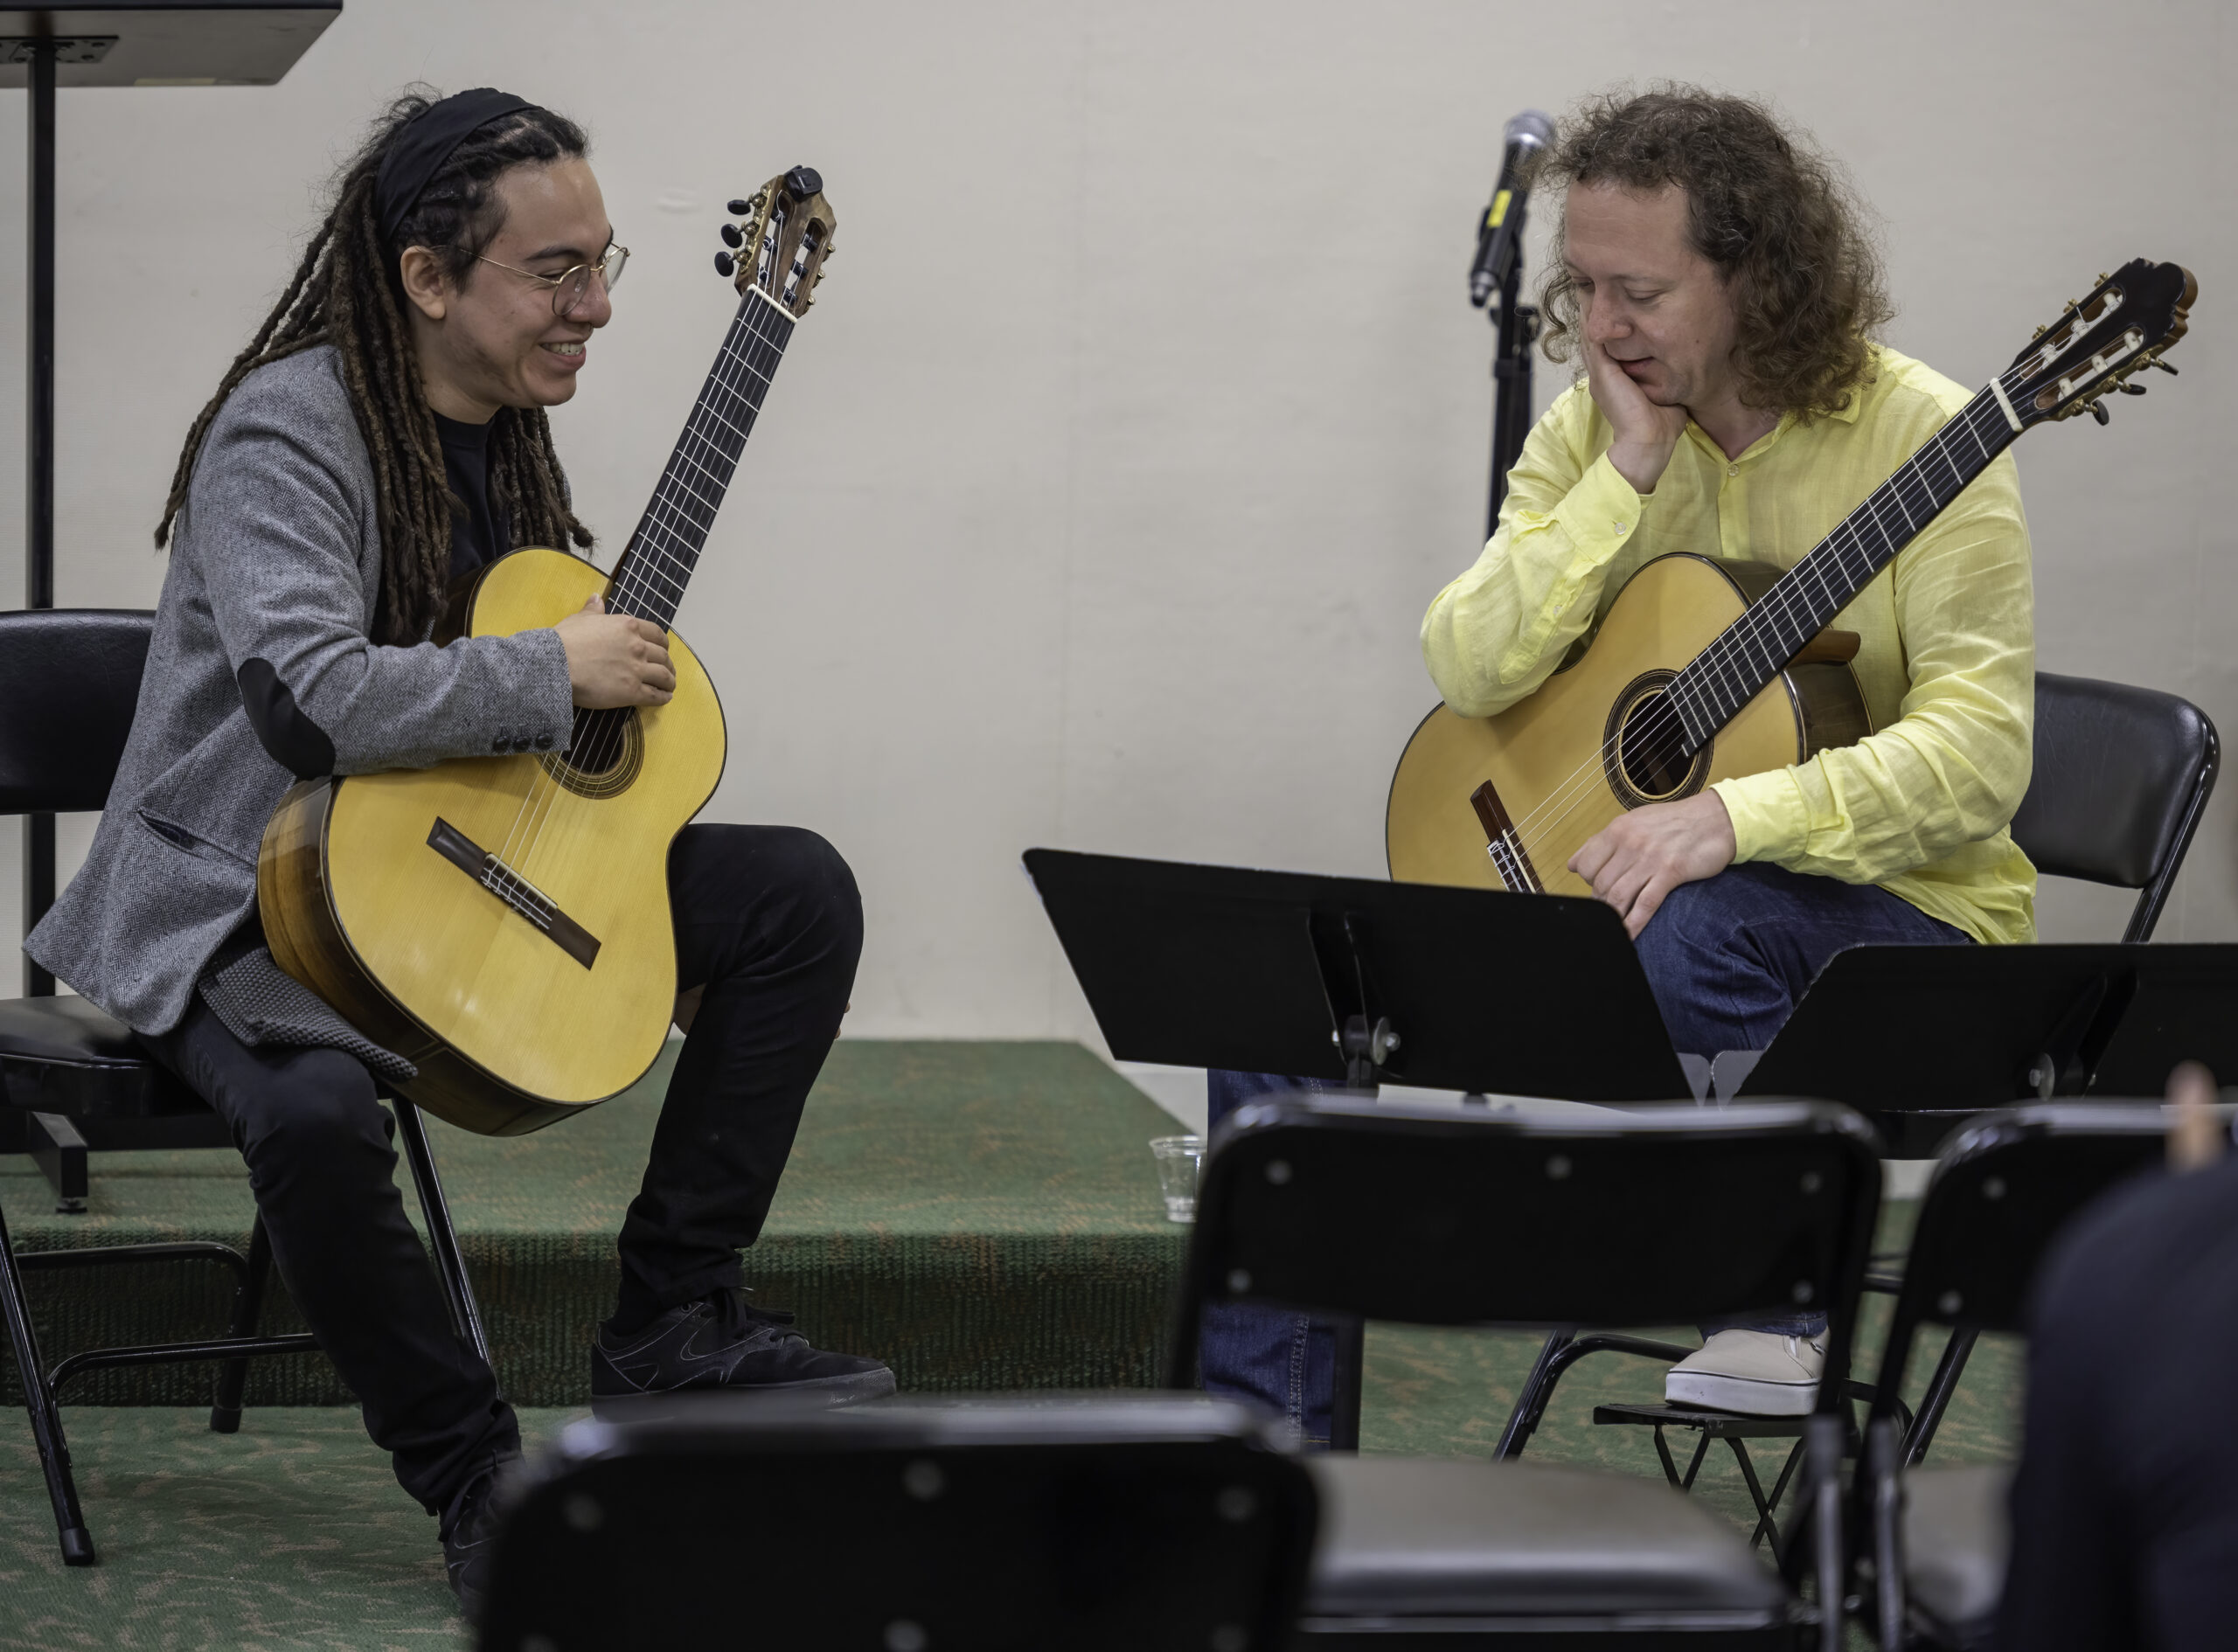 Dimitri Illarionov holds masterclass for classical guitarists. A San Antonio Philharmonic hosted event.